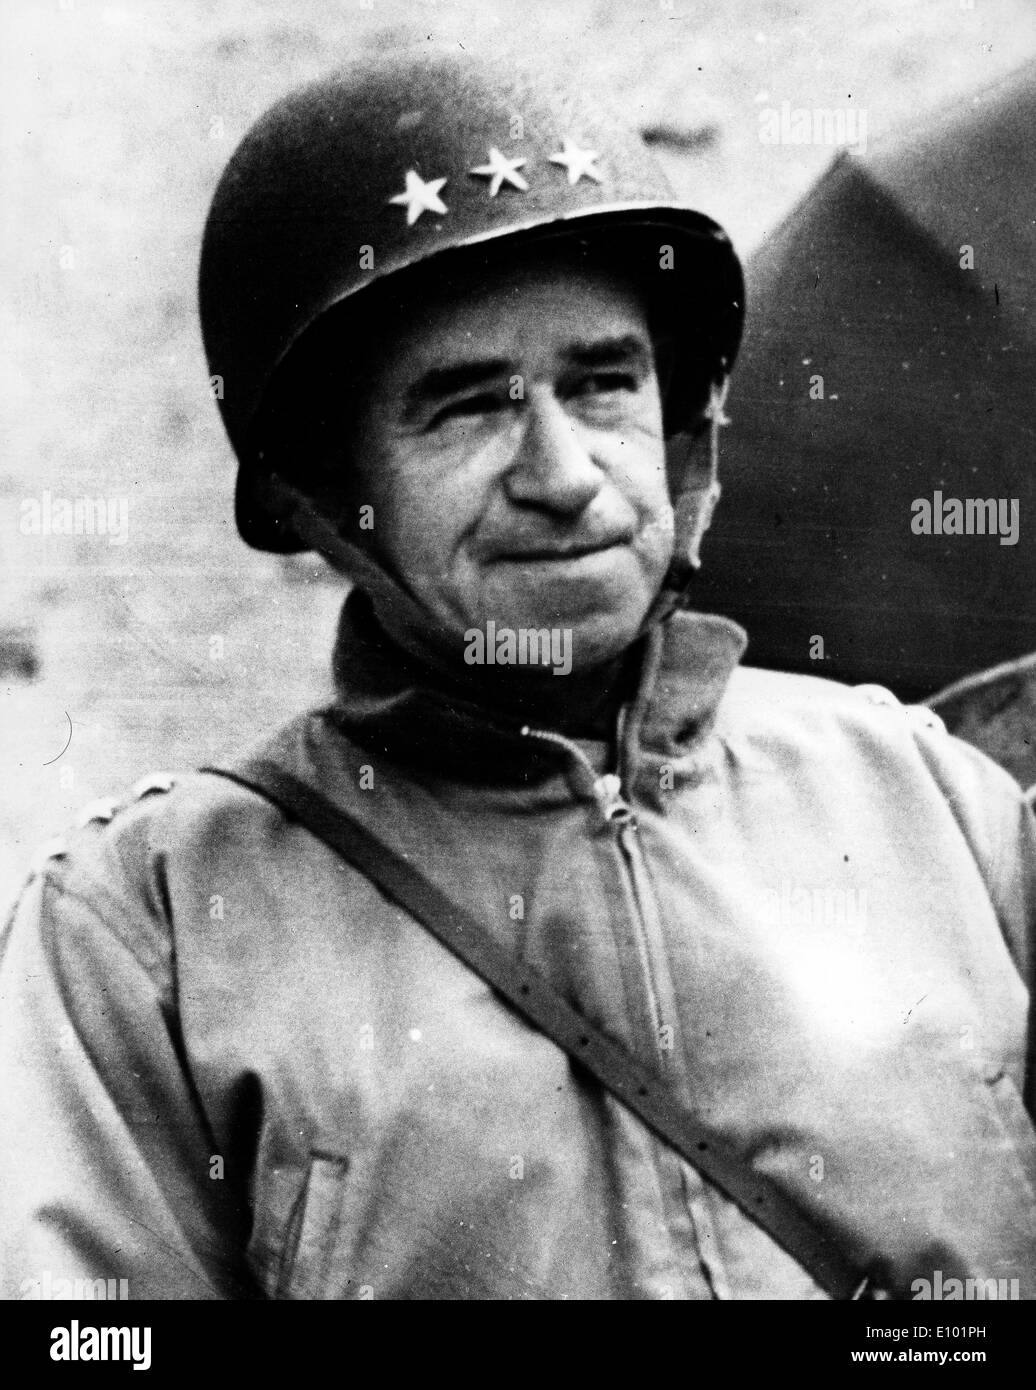 omar-bradley-general-of-the-army-one-of-the-main-us-army-field-commanders-E101PH.jpg